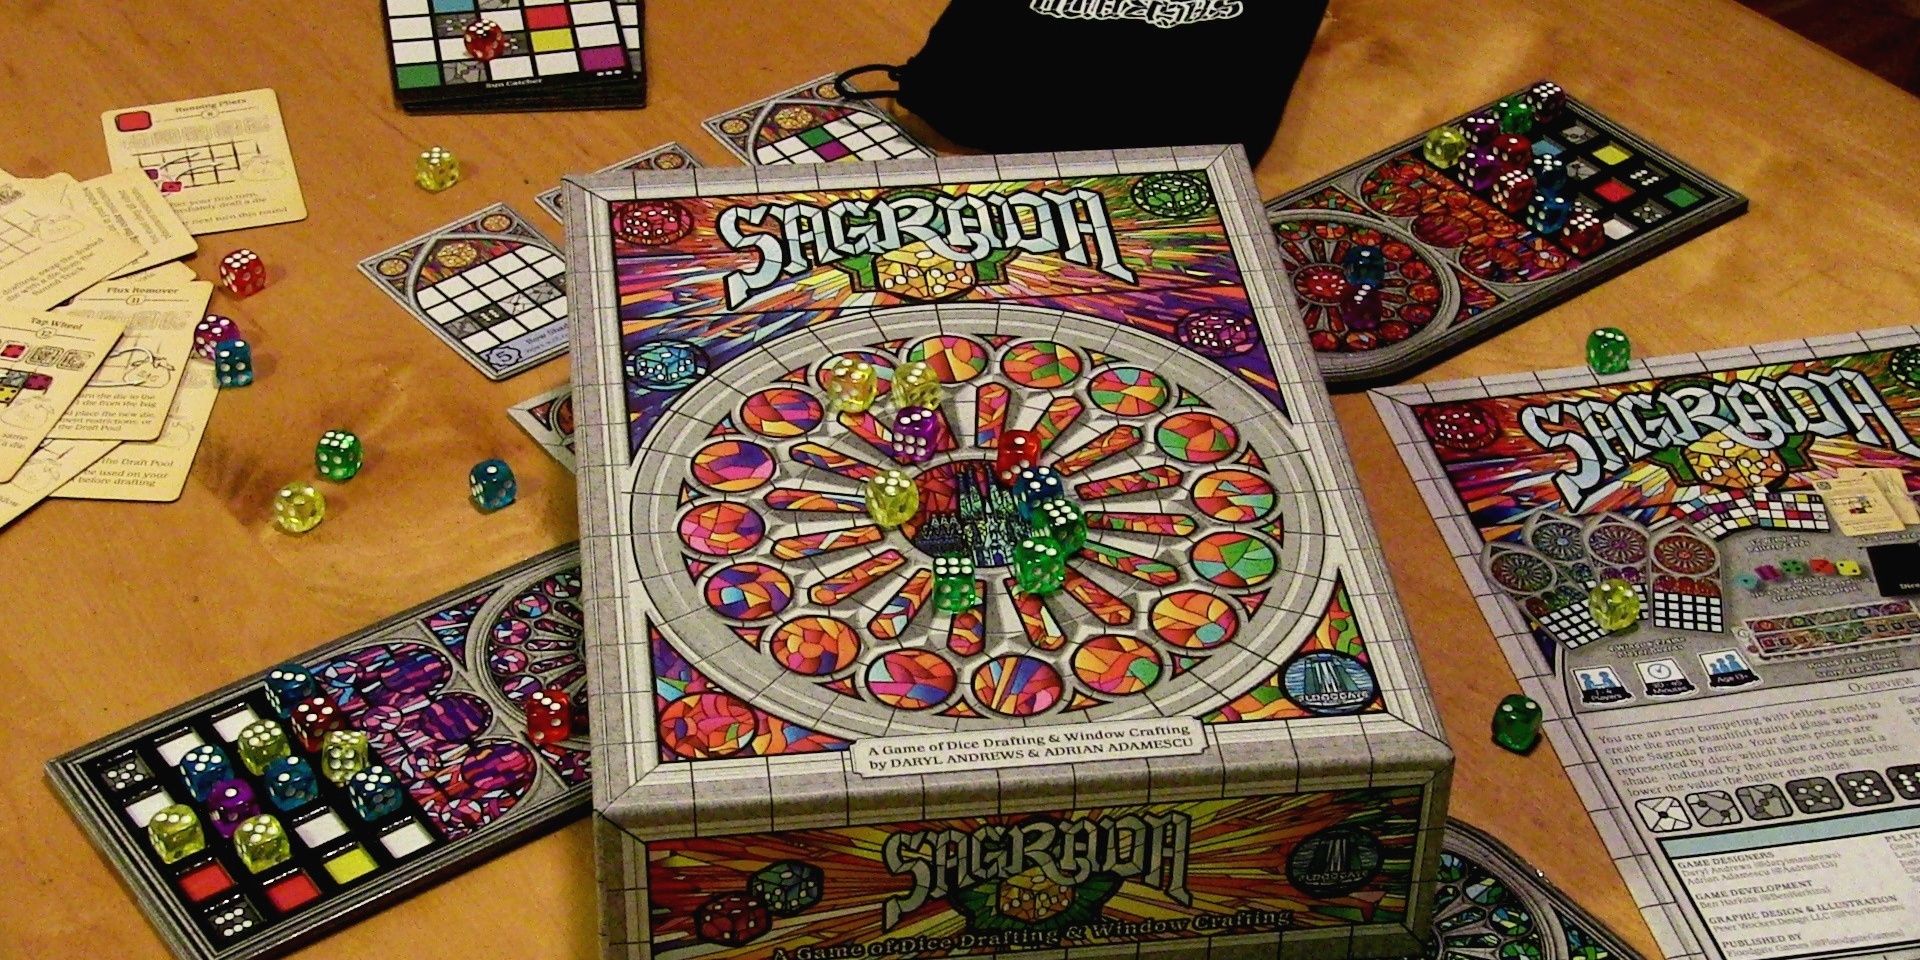 Sagrada is a die stacking board game with semi sheer dice set